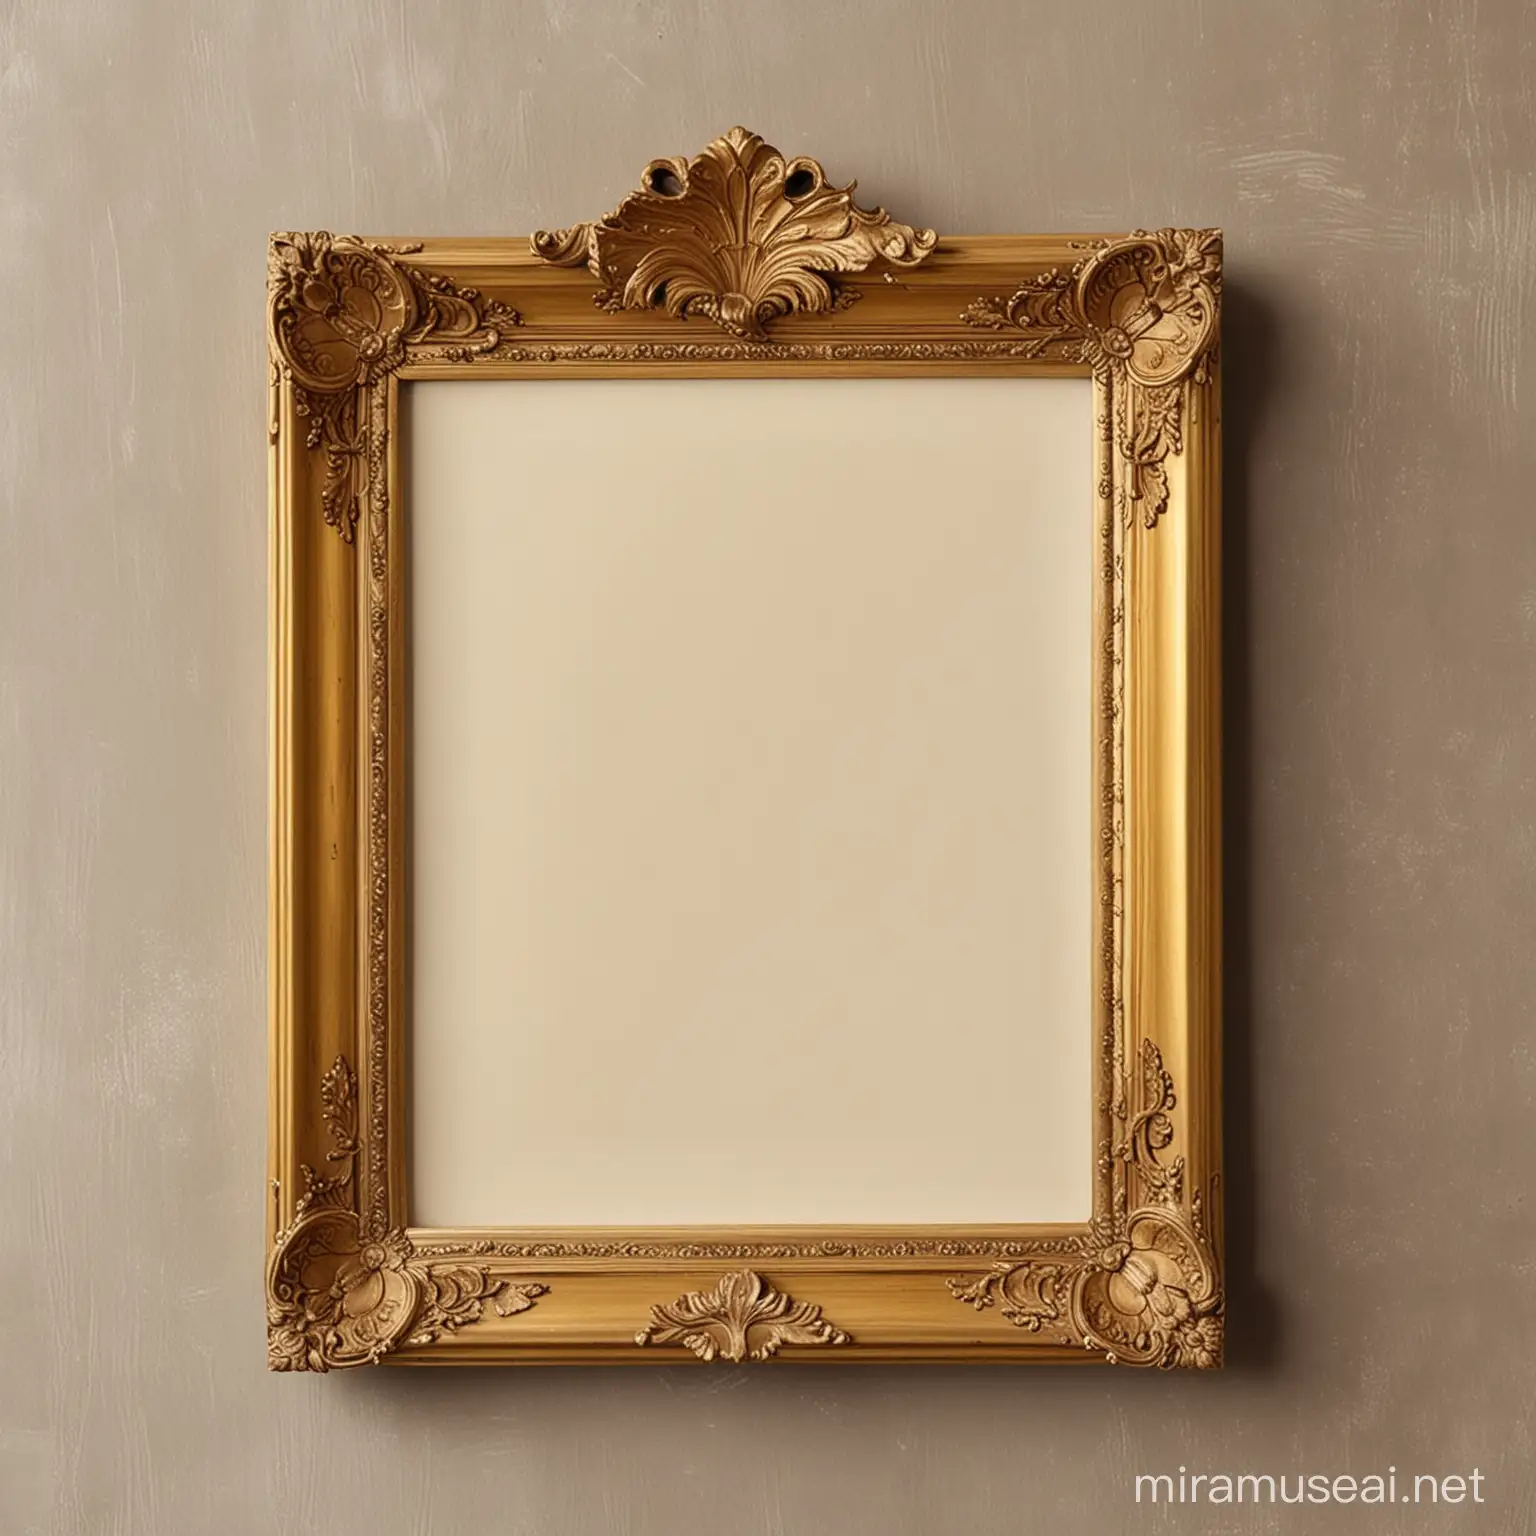 A blank, gold, vintage frame on a wall